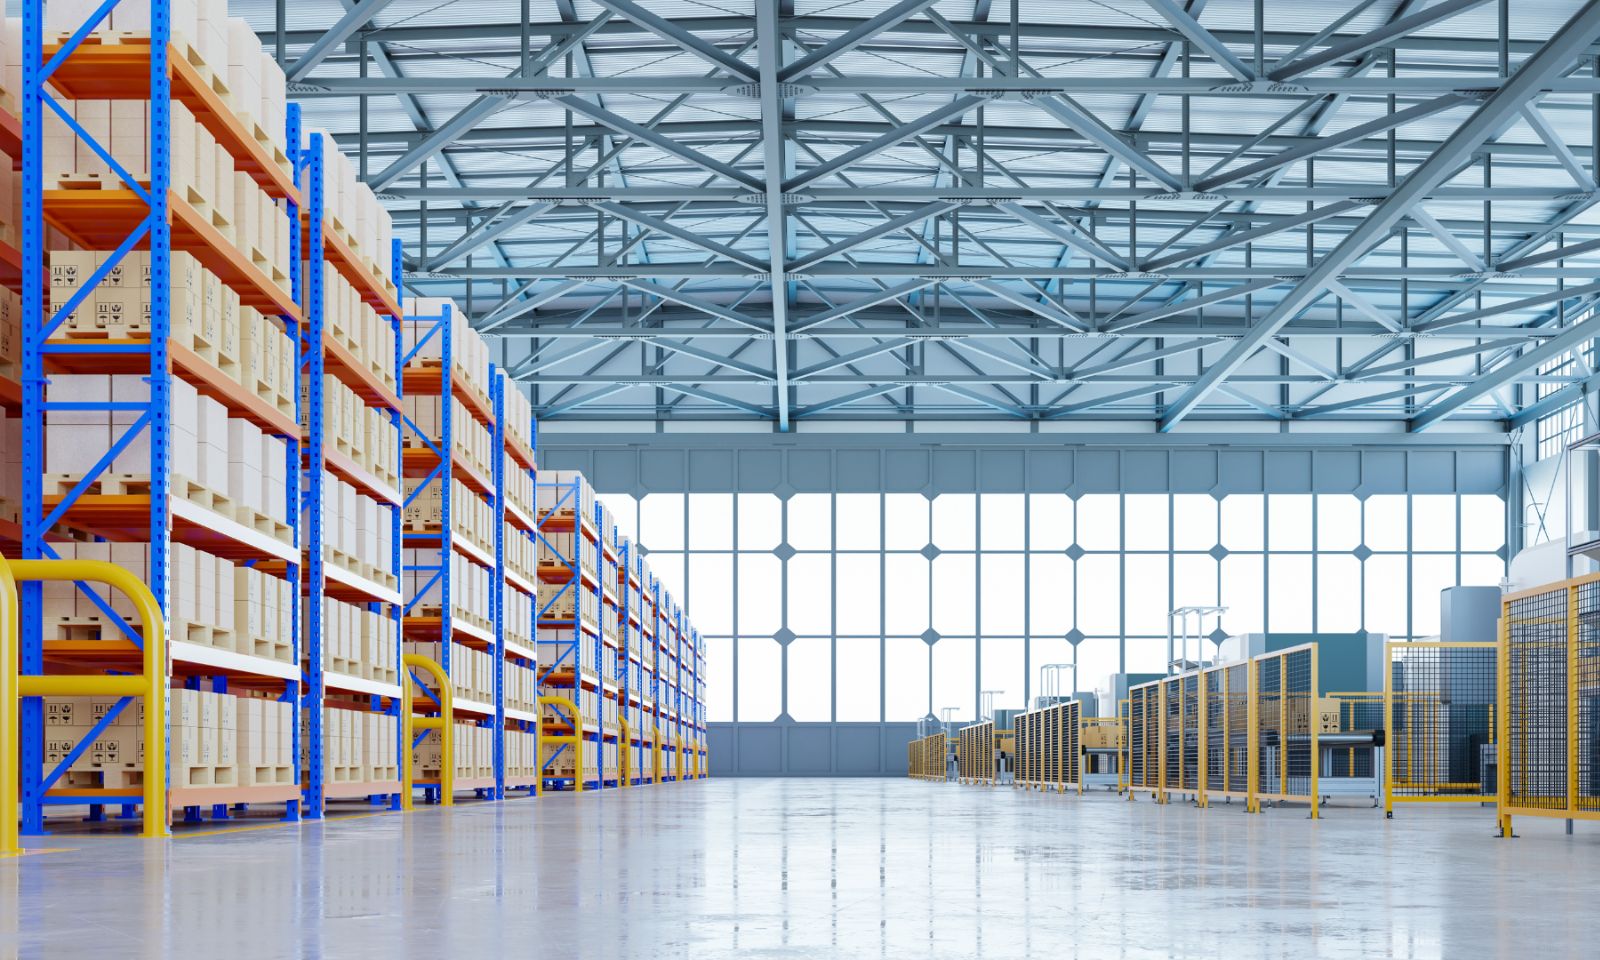 From receiving, inspecting, put-away, picking, packing and shipping up to complete warehouse management, contract logistics can automate your supply chains and improve track & tracing of each SKU. 